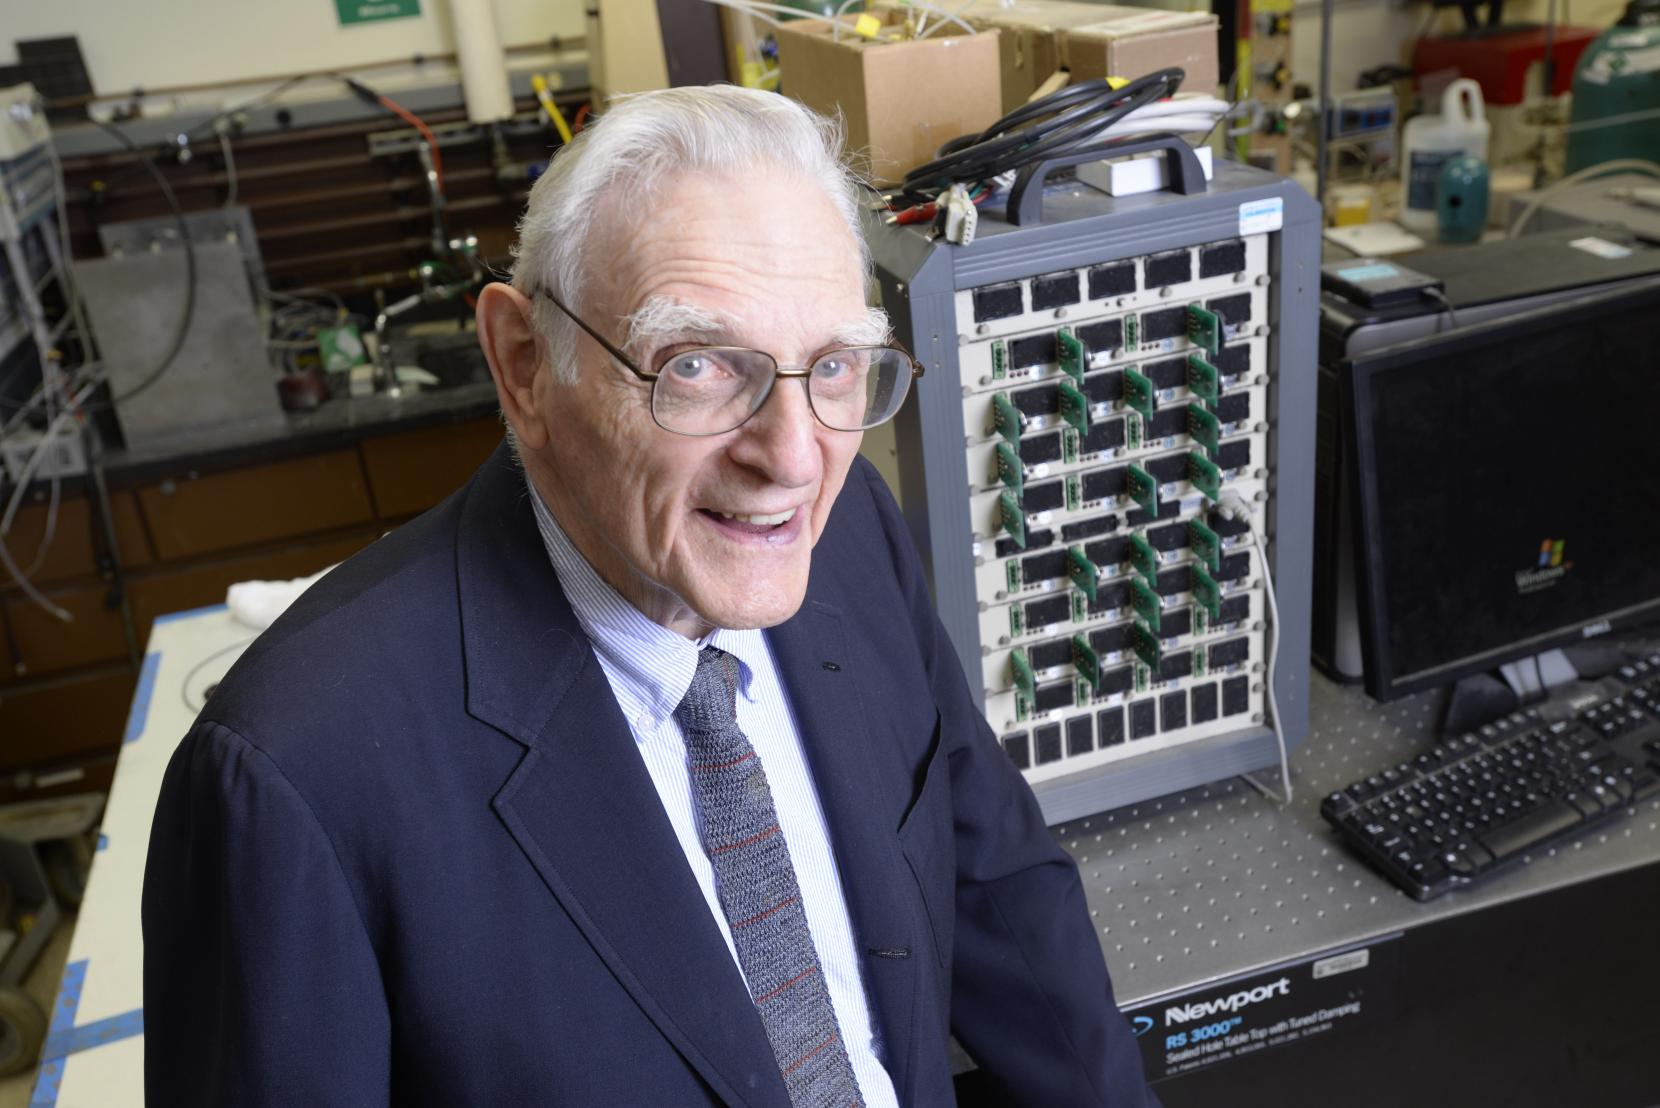 John Goodenough and his team have developed the first all-solid-state battery cells that could lead to safer, faster-charging, longer-lasting rec